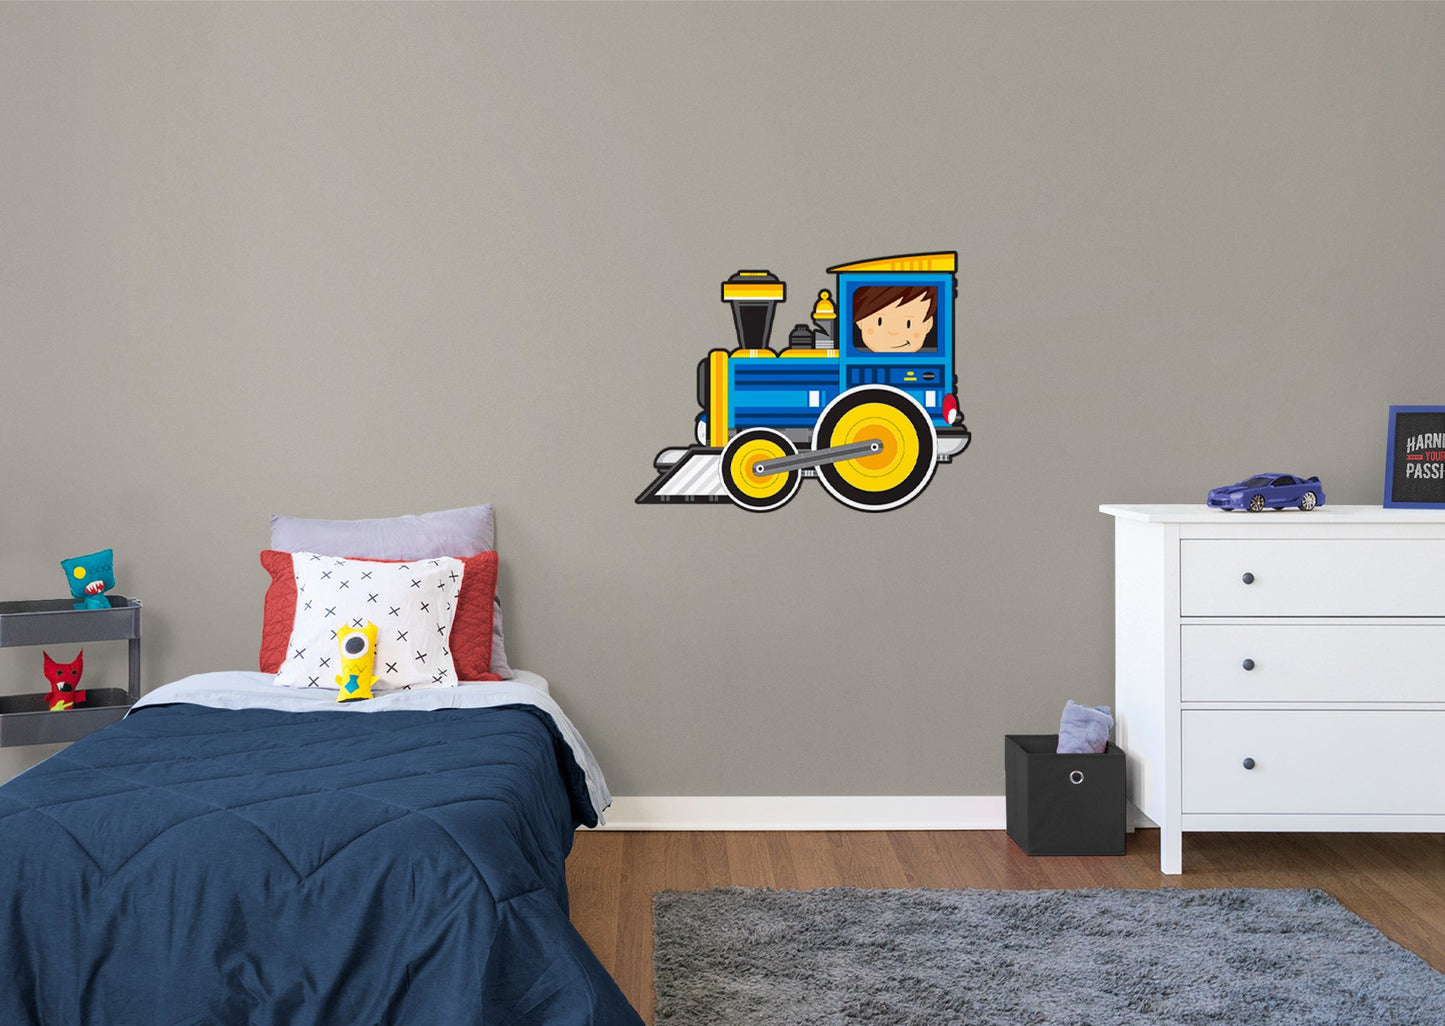 Nursery:  Blue Engine Icon        -   Removable Wall   Adhesive Decal